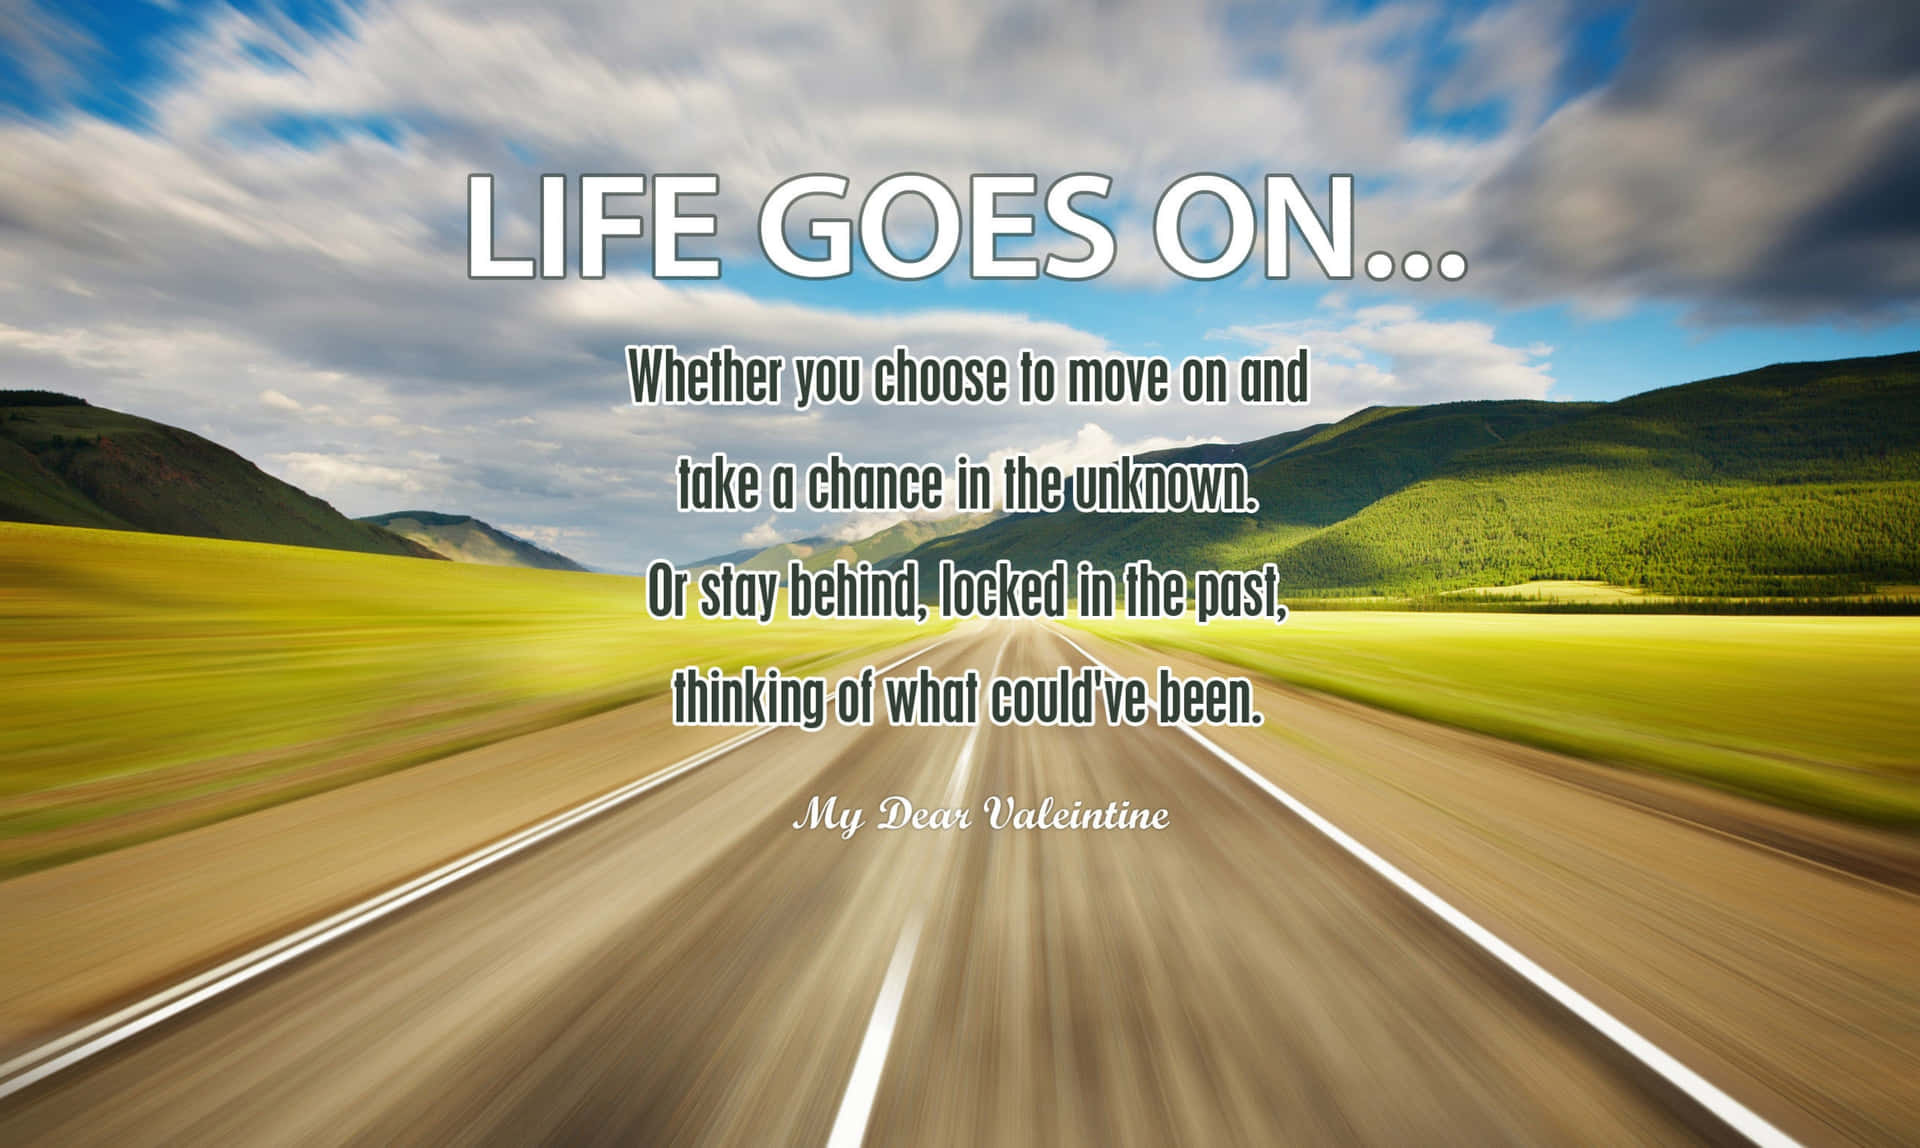 life goes on sayings and quotes